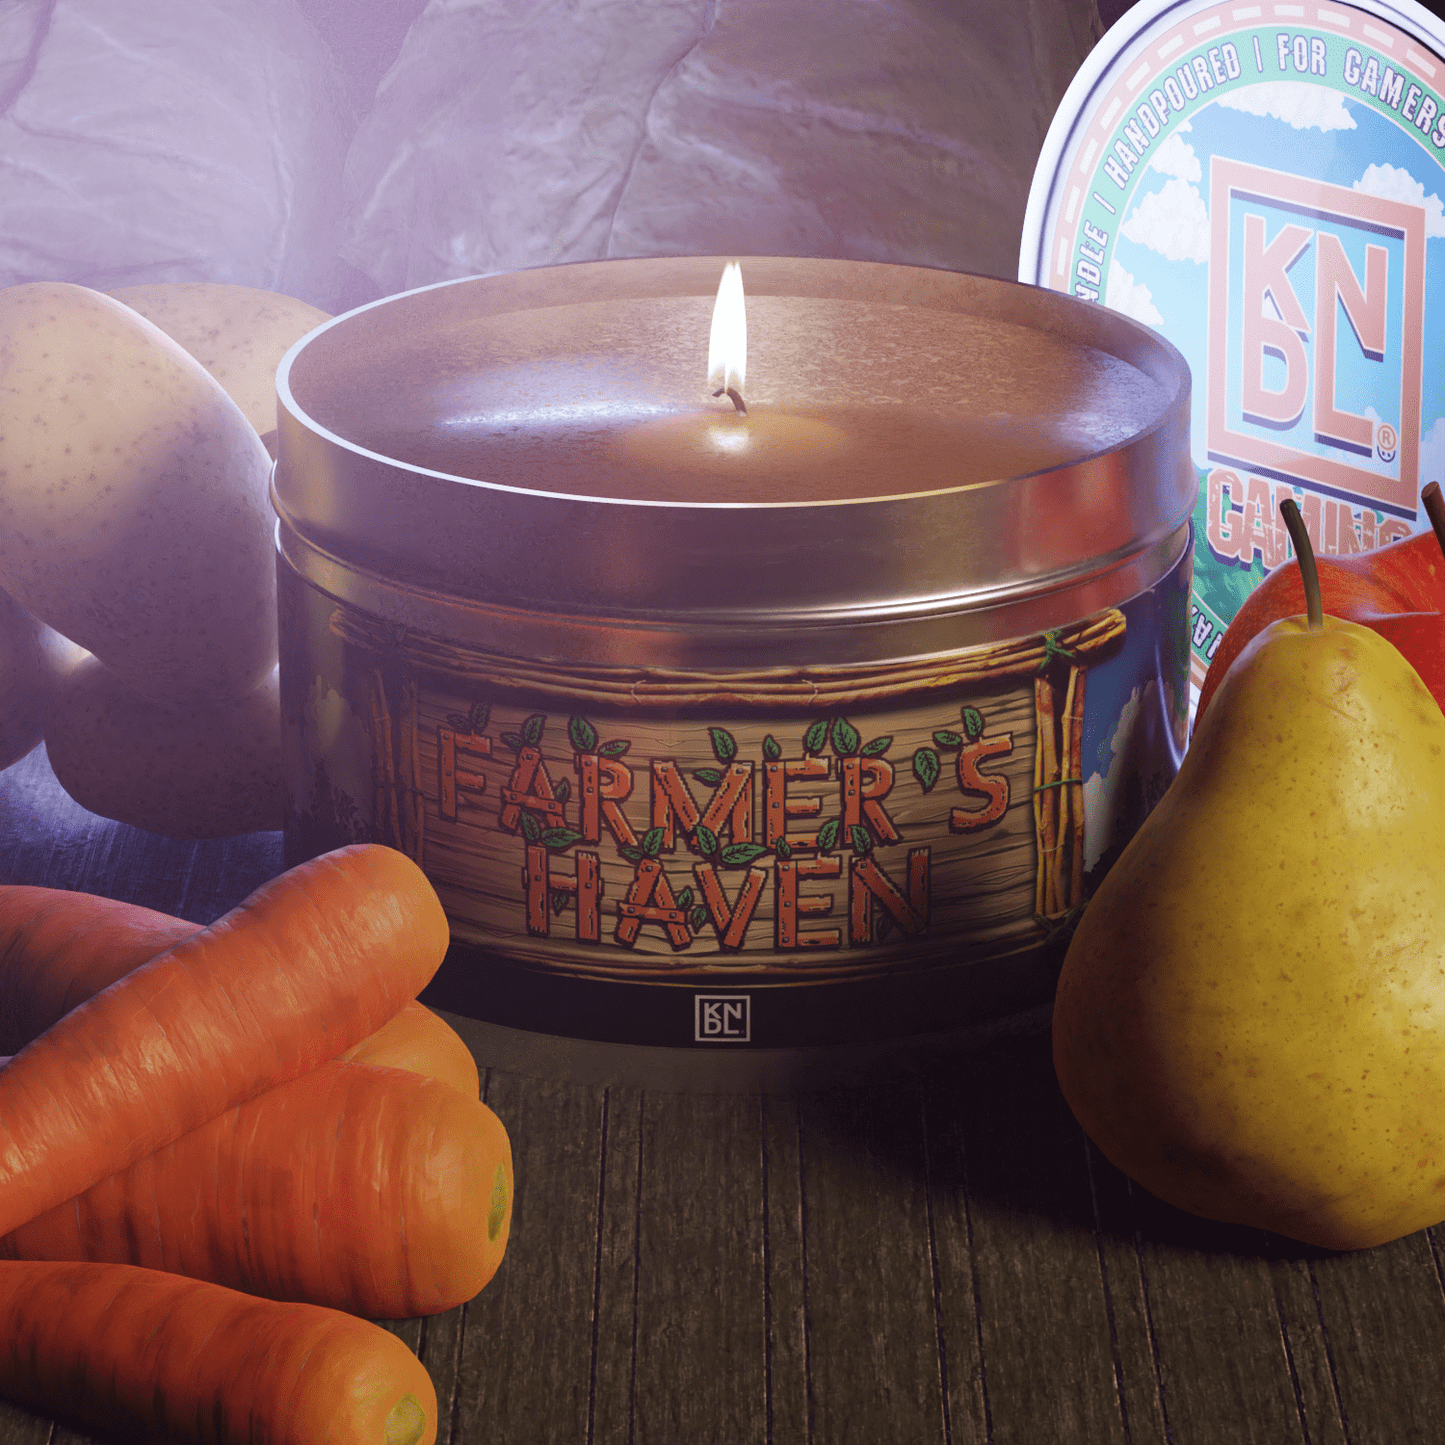 TIN NR 10 | FARMER'S HAVEN | STARDEW VALLEY INSPIRED SCENTED CANDLE